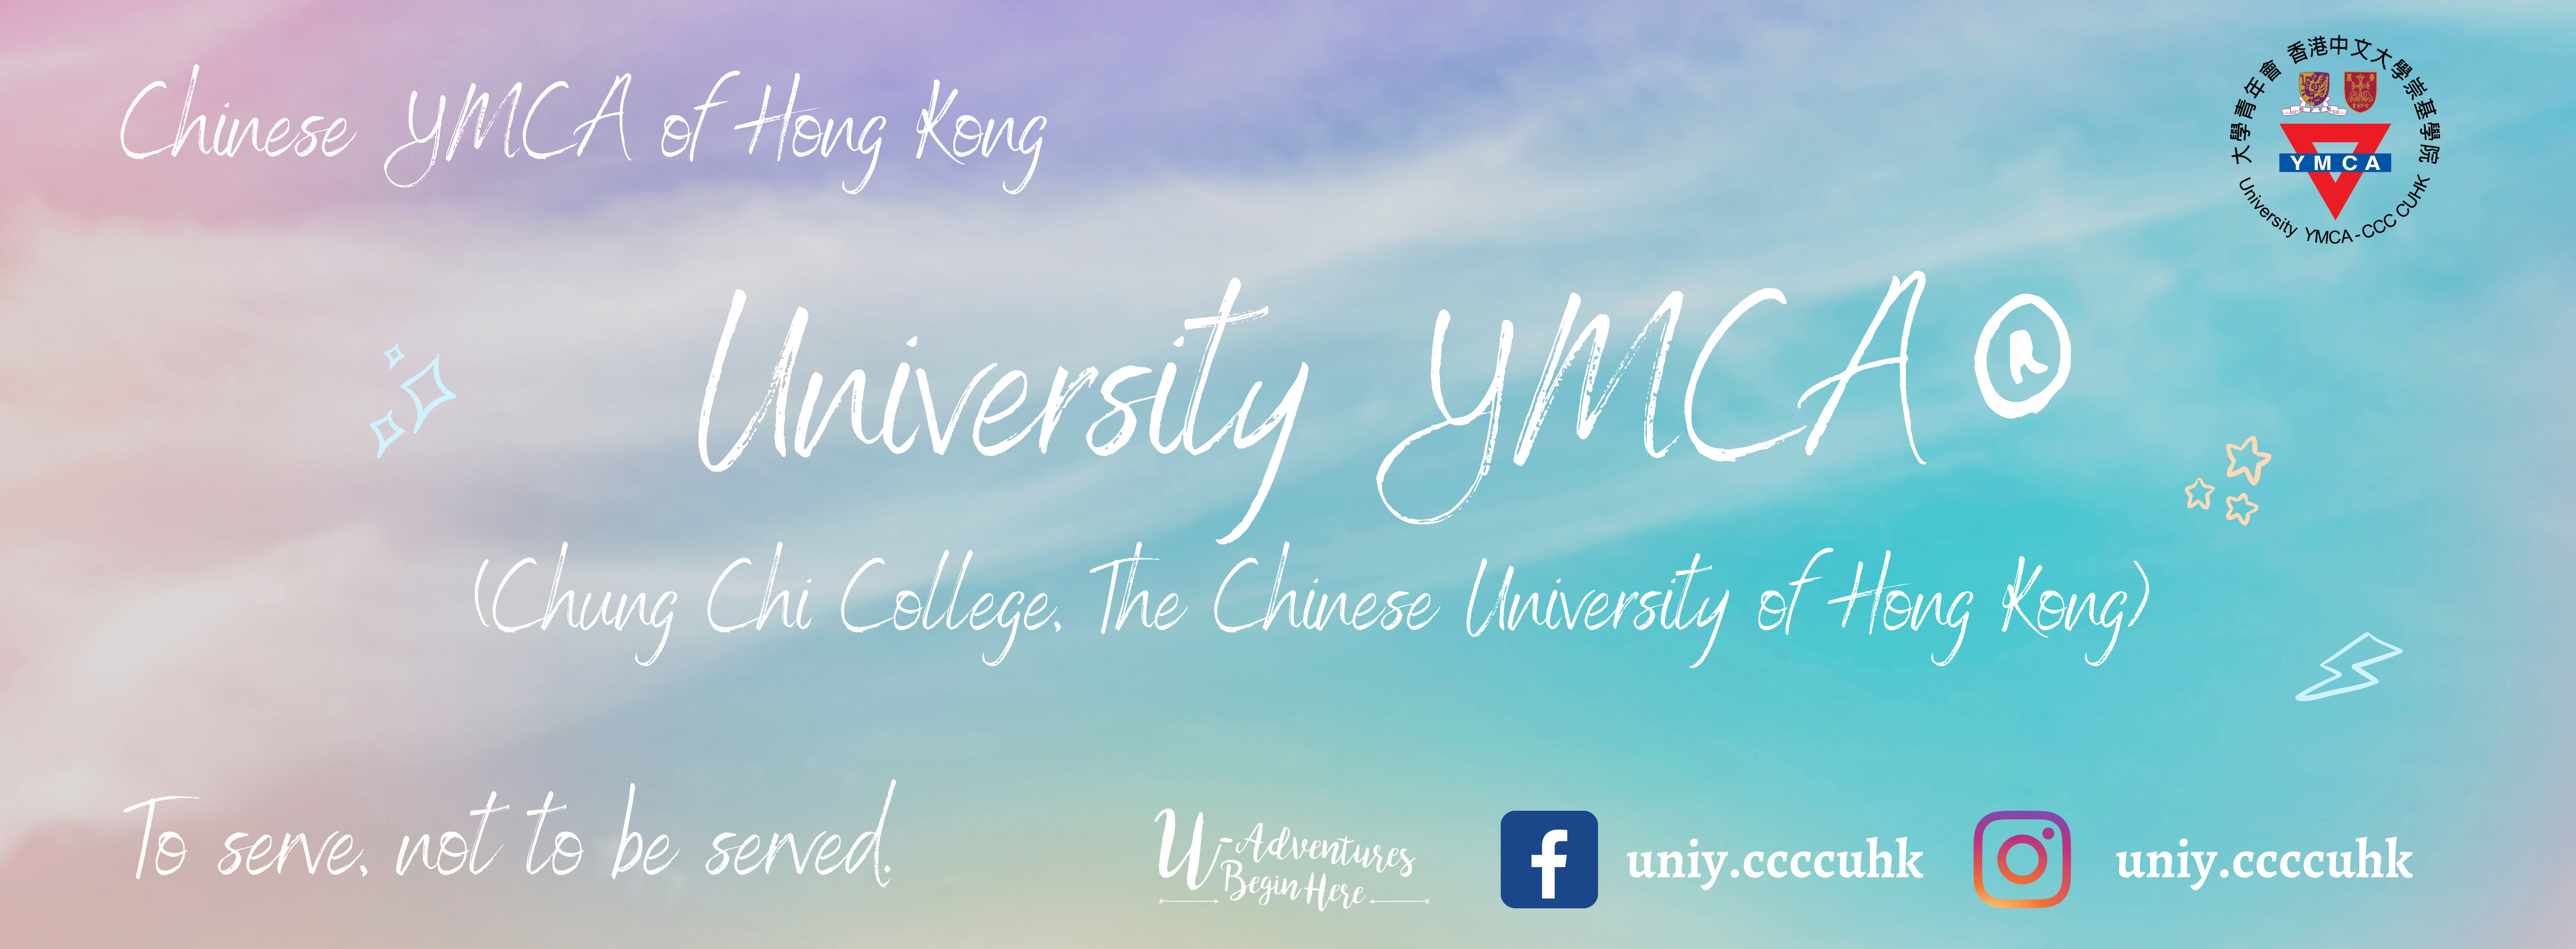 University YMCA Chung Chi College, The Chinese University of Hong Kong Download Banner